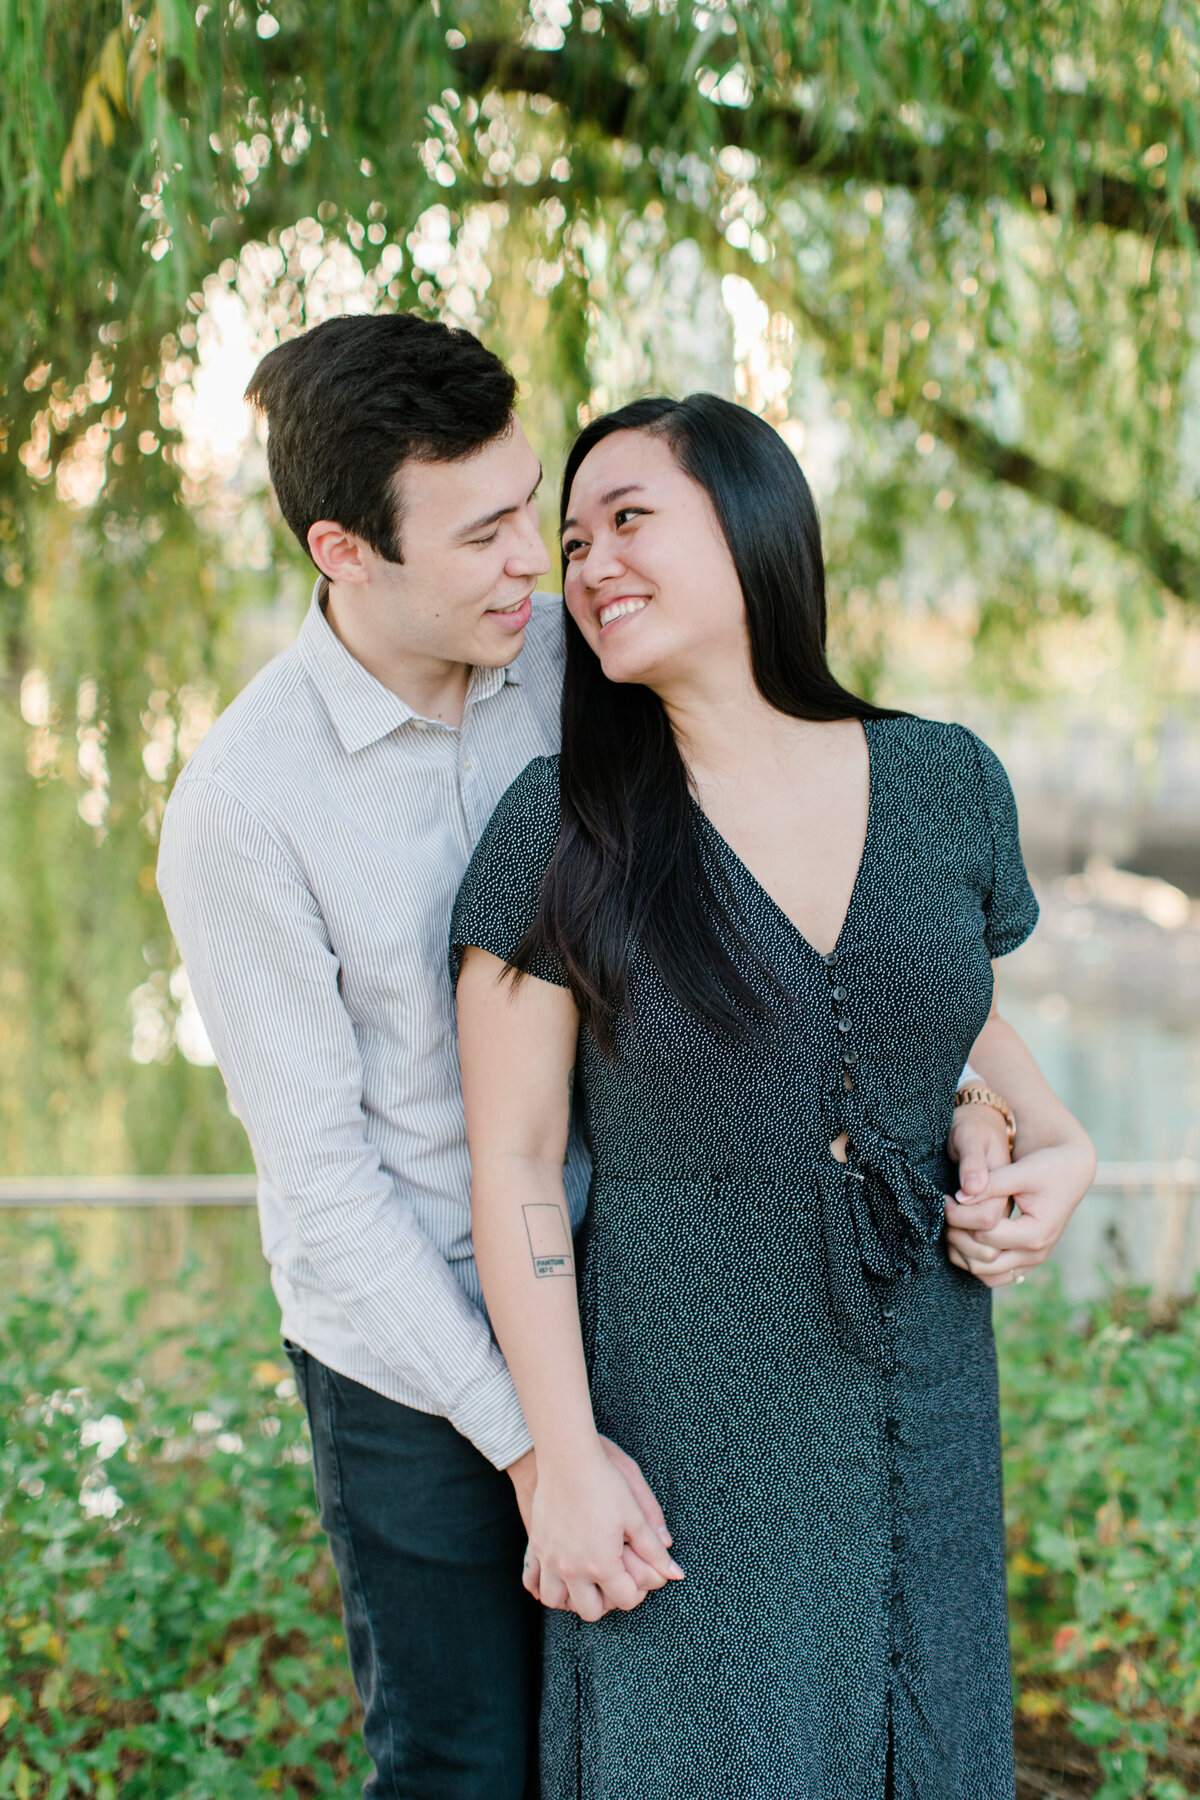 Becky_Collin_Navy_Yards_Park_The_Wharf_Washington_DC_Fall_Engagement_Session_AngelikaJohnsPhotography-7802